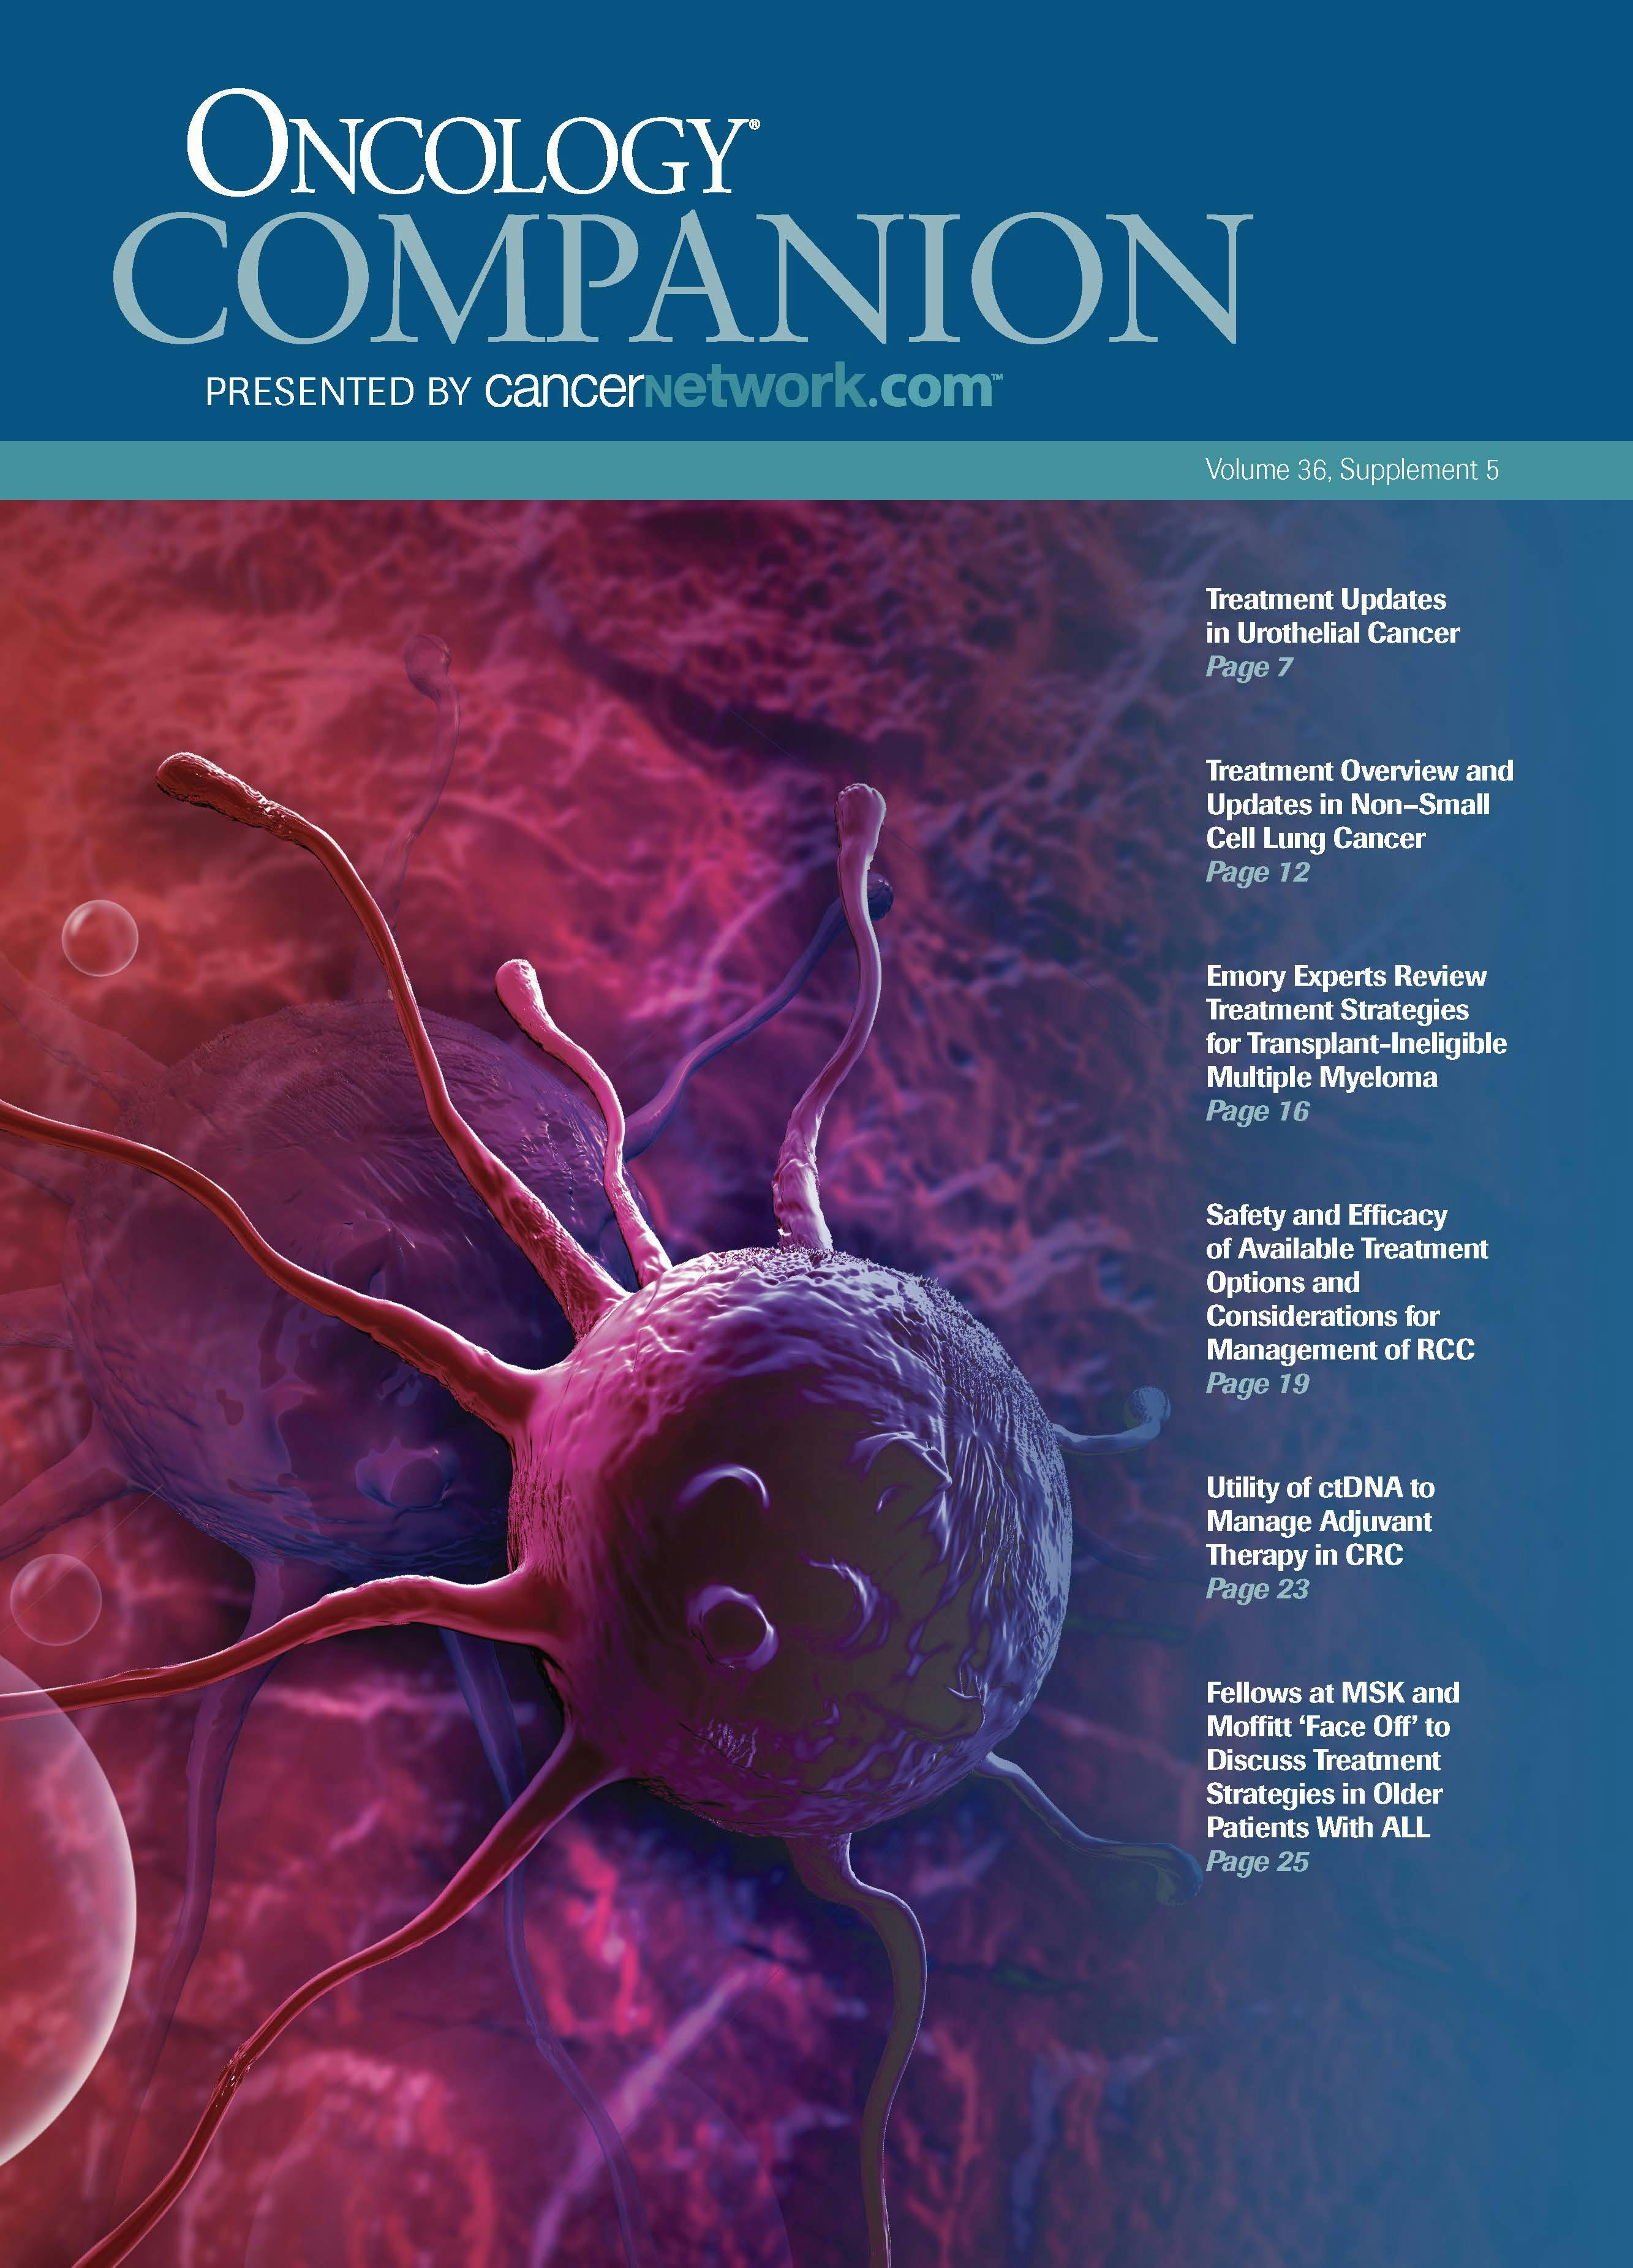 ONCOLOGY® Companion, Volume 36, Supplement 5